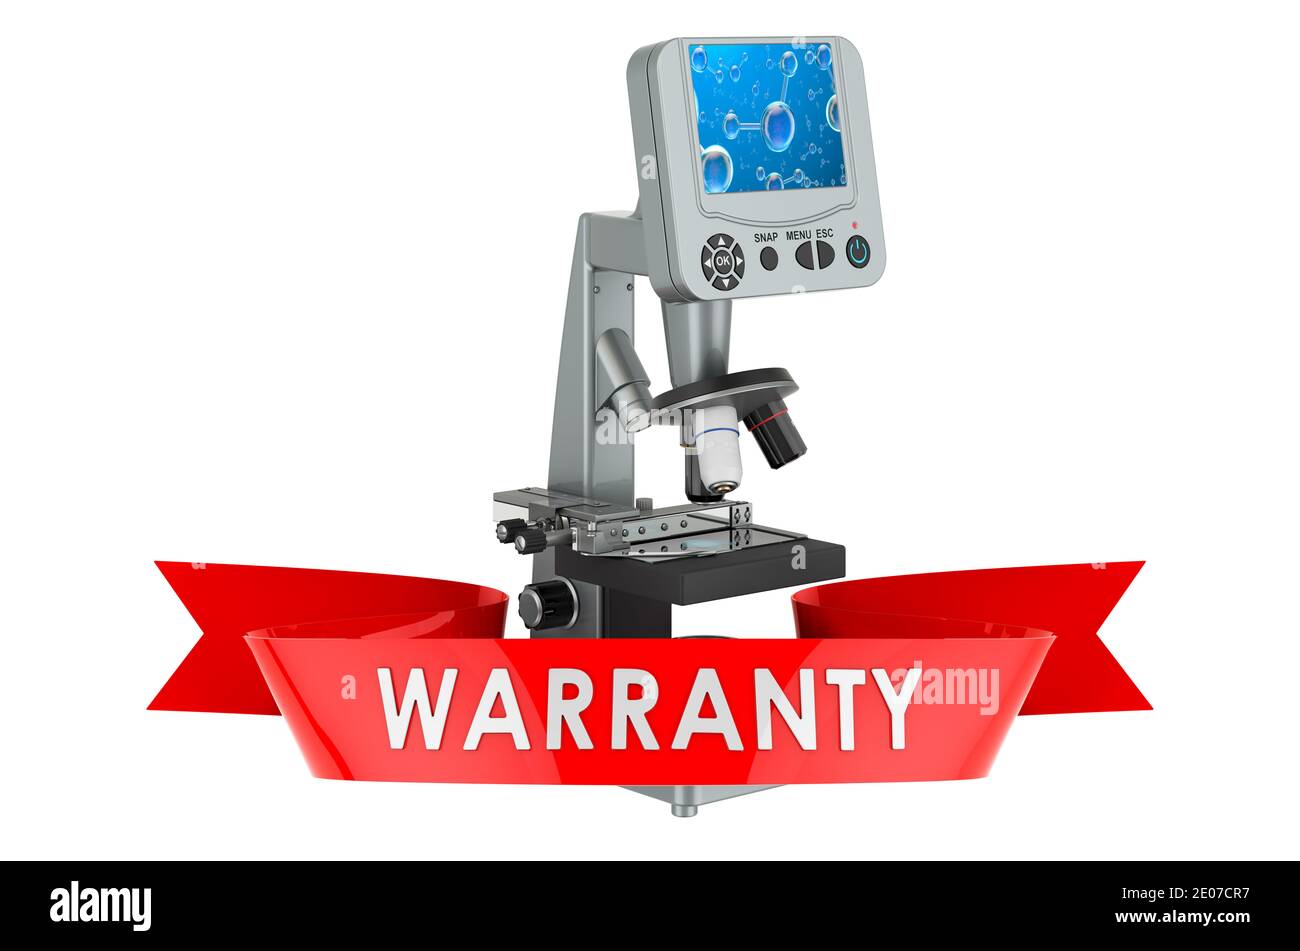 Dogital microscope warranty concept. 3D rendering isolated on white background Stock Photo